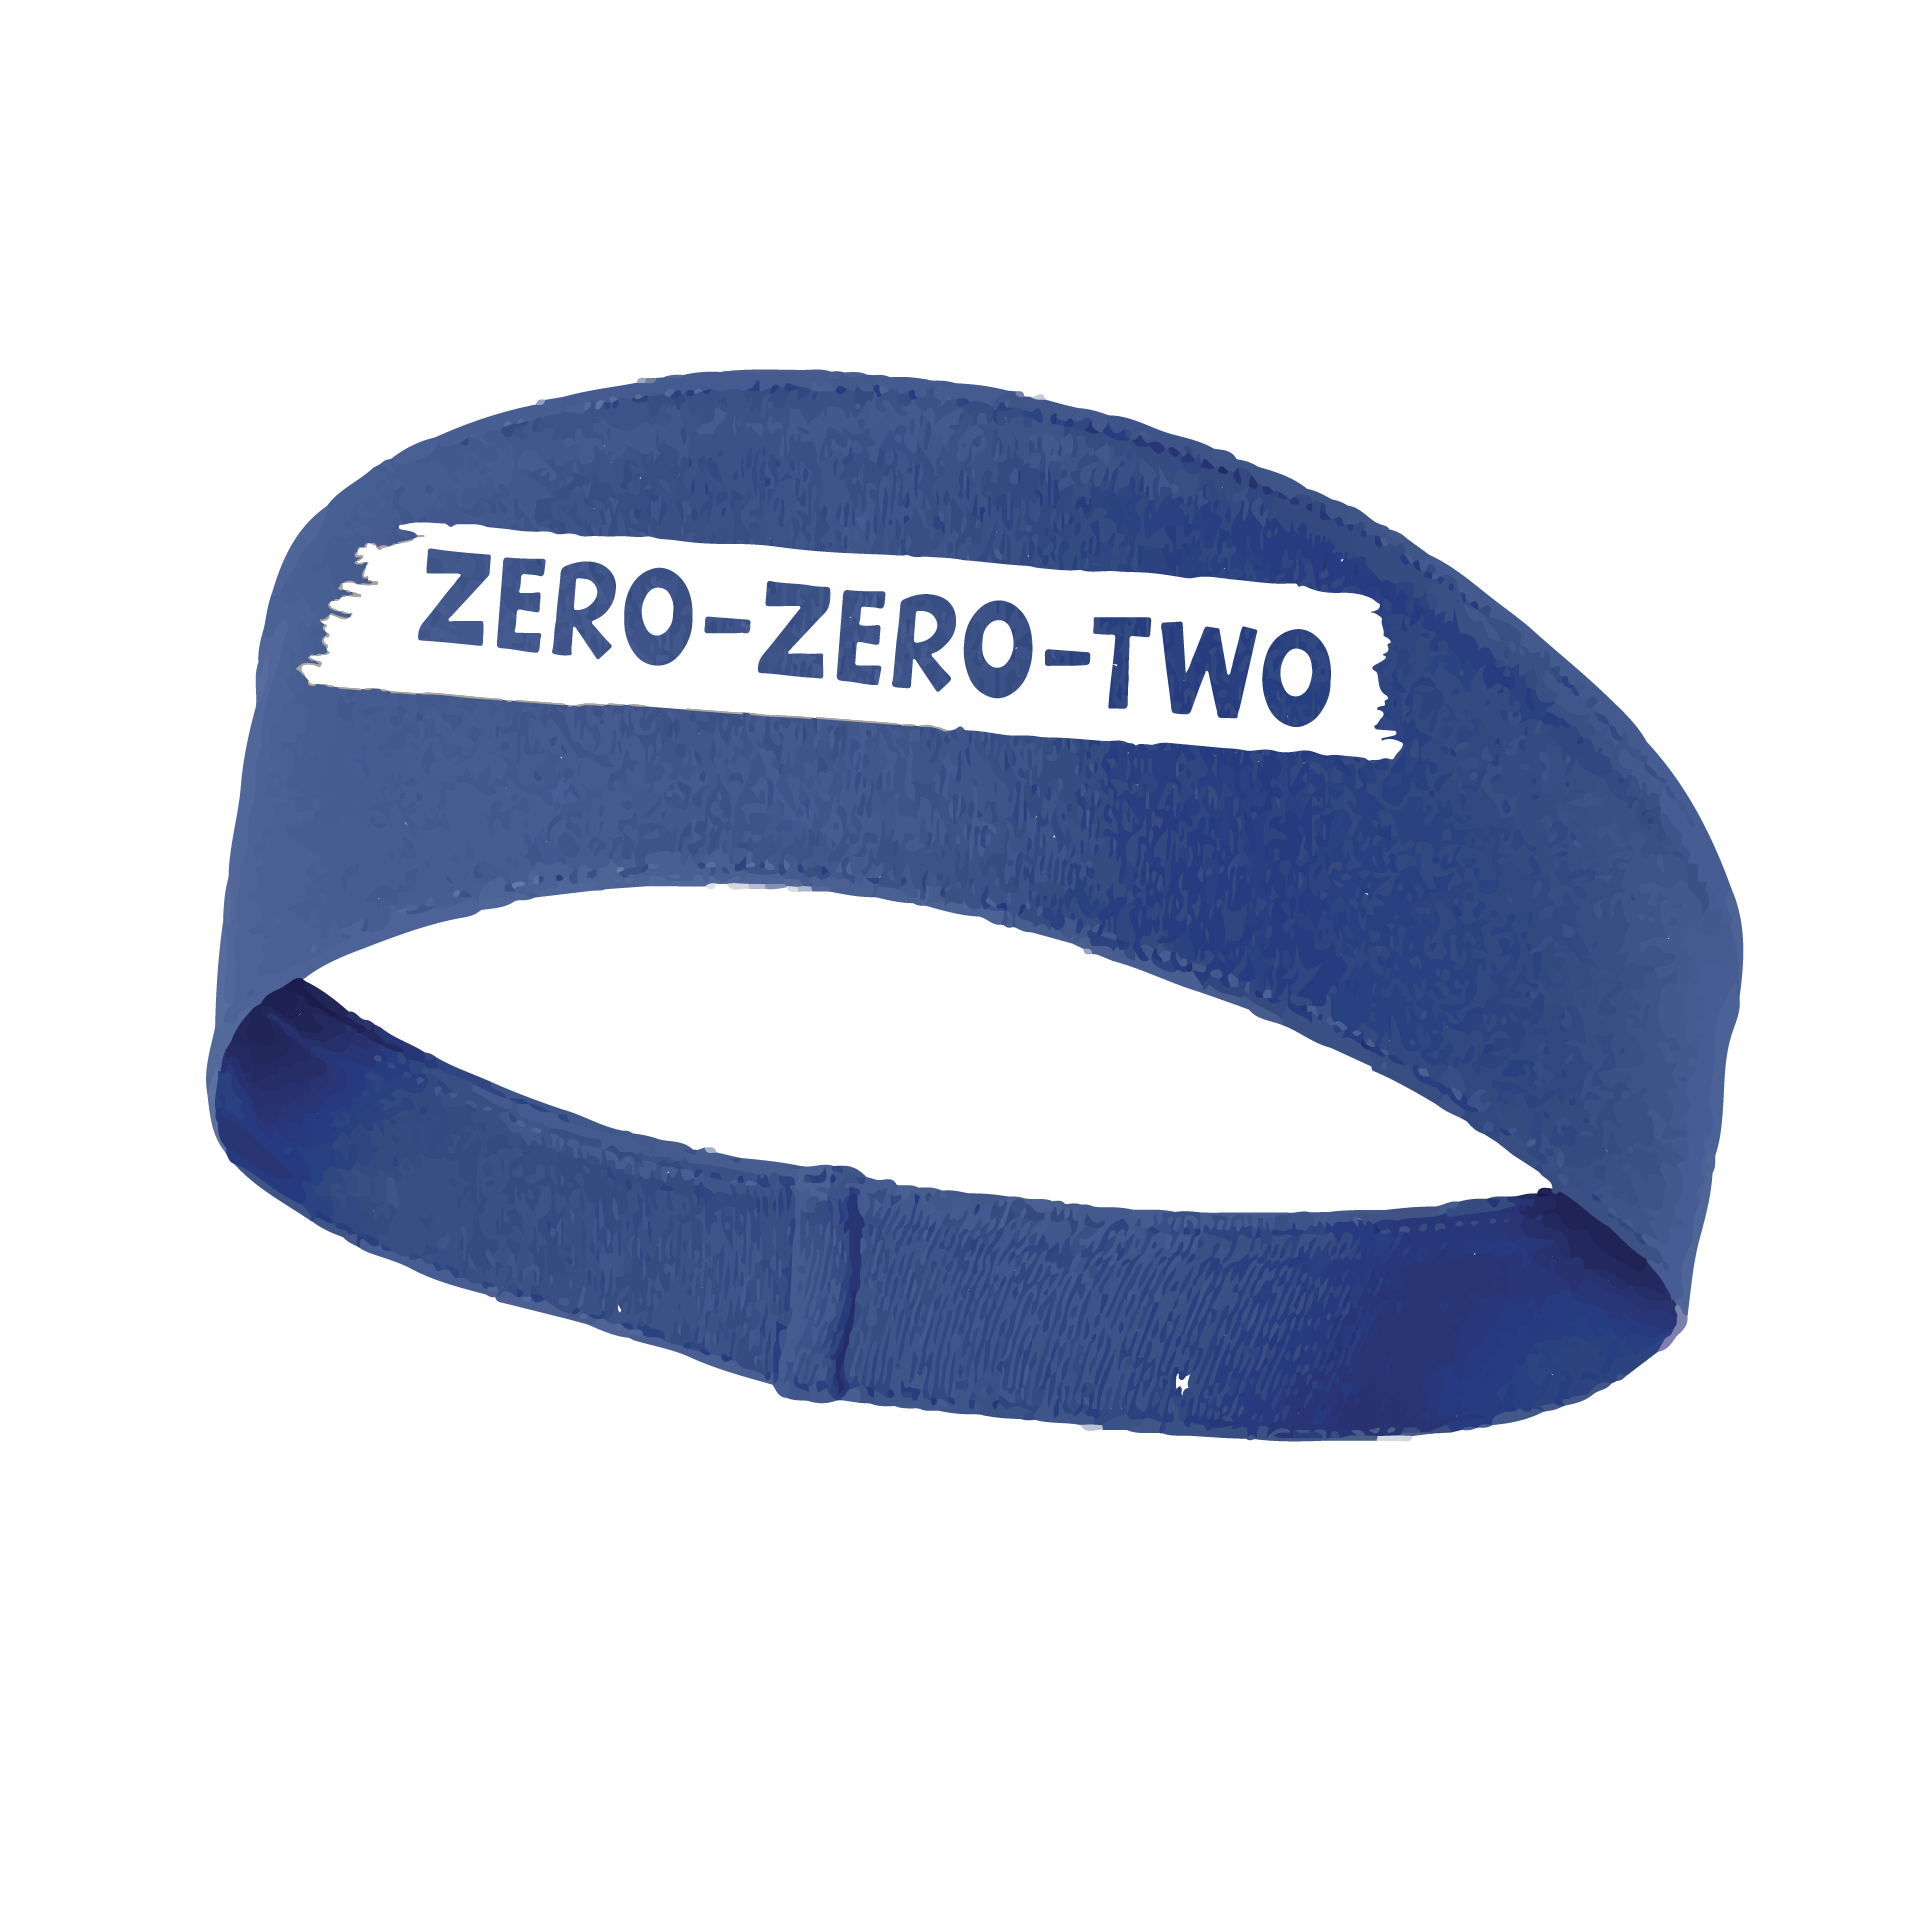 Pickleball Headband Design: Zero Zero Two  This fun, pickleball designed, moisture-wicking headband narrows in the back to fit more securely. Single-needle top-stitched edging. These headbands come in a variety of colors. Truly shows your love for the sport of pickleball!! 